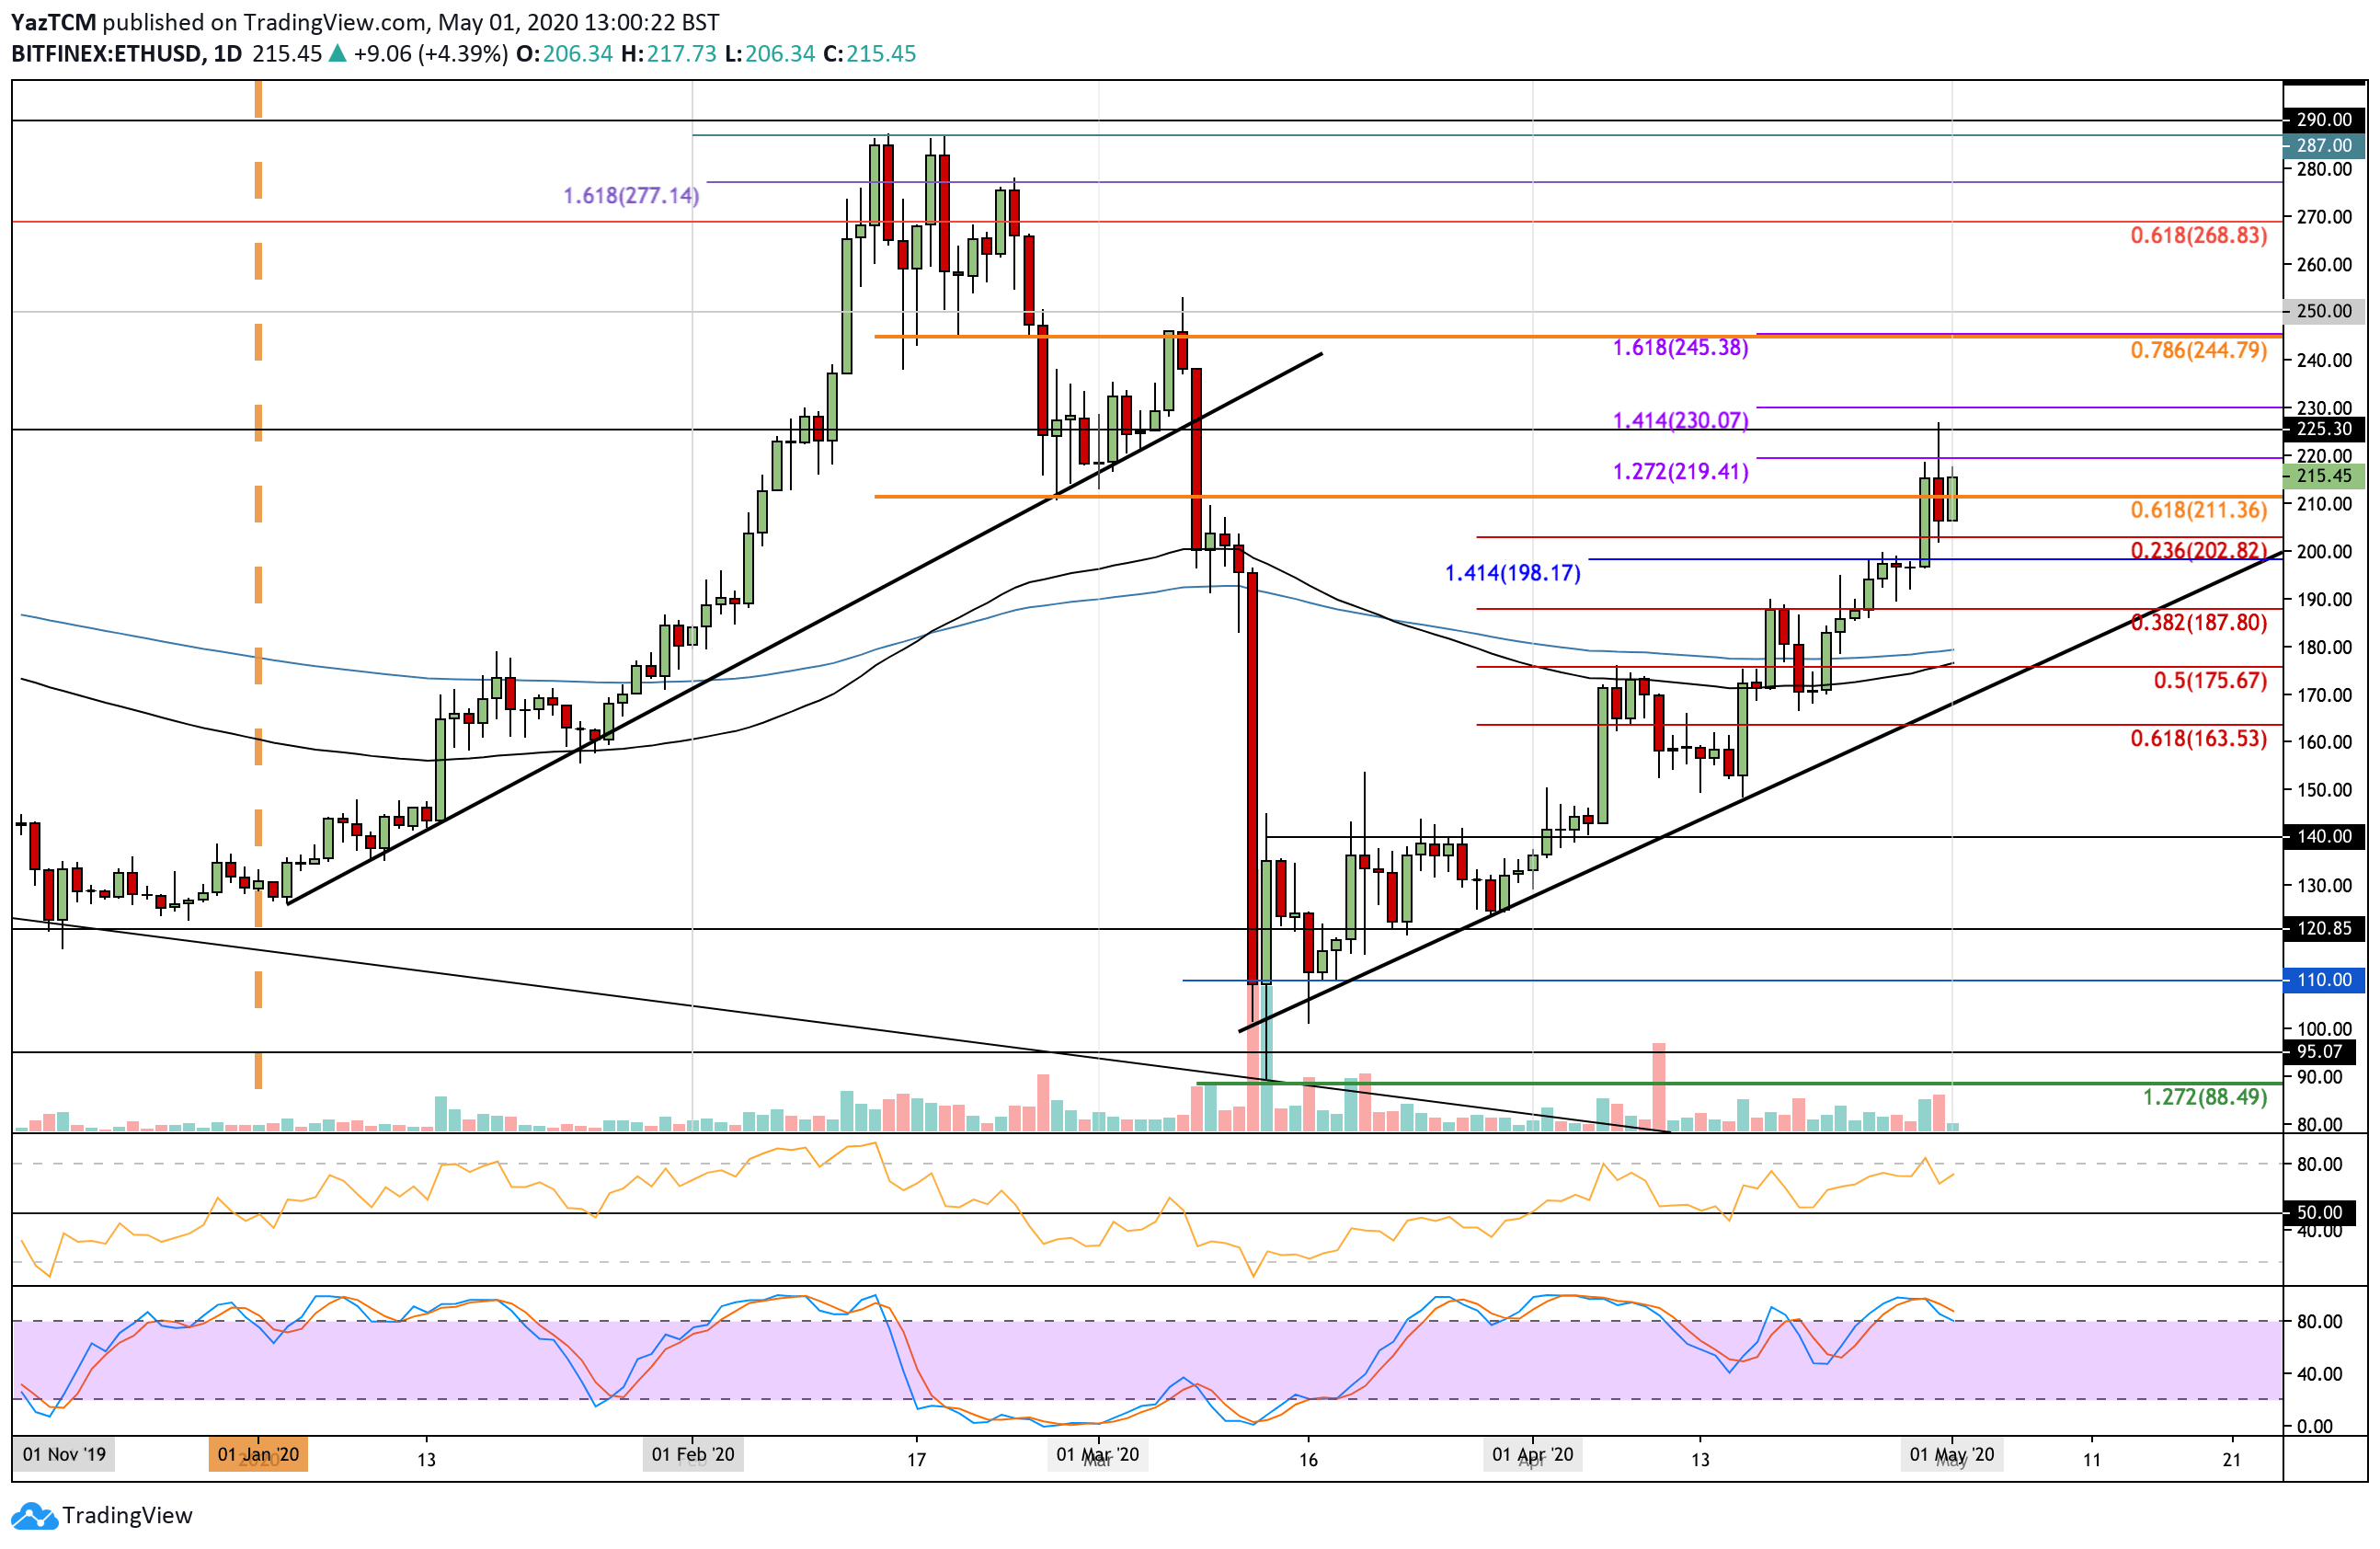 Ethereum Price Analysis: ETH Follows Bitcoin And Finally Breaks $200. What’s Next?